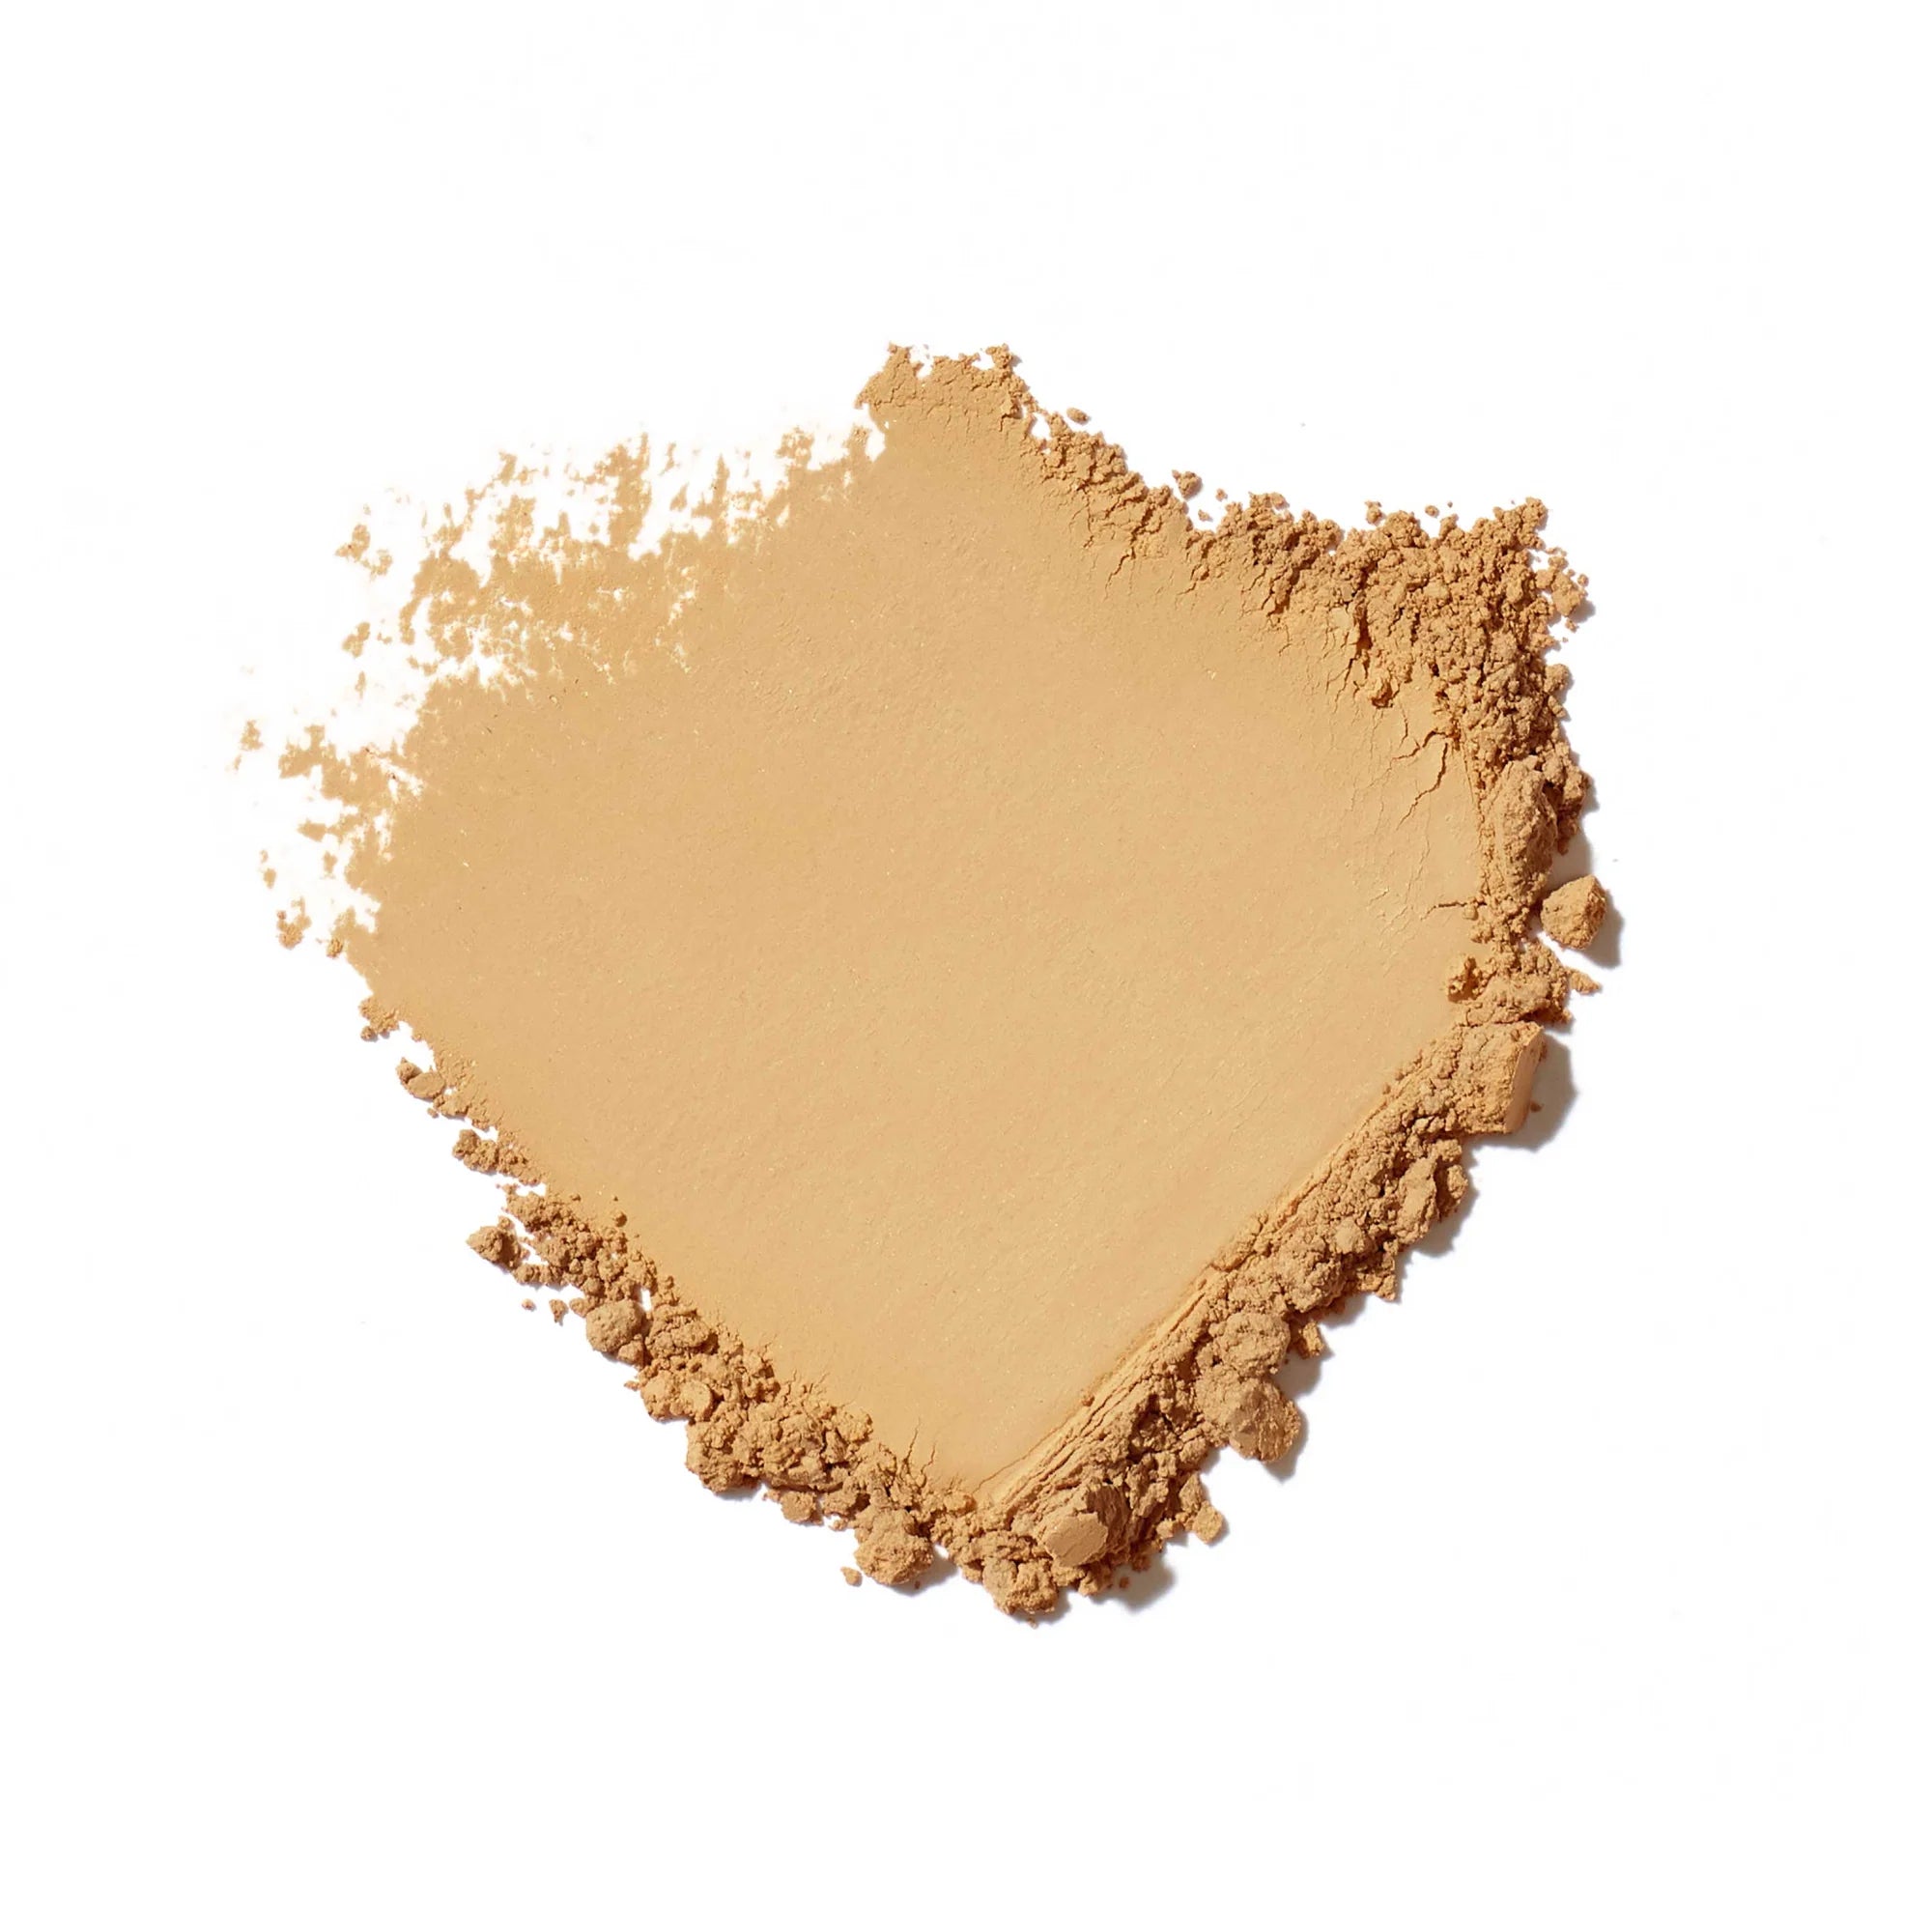 Jane Iredale's Amazing Base® Loose Mineral Powder SPF 20 - shade Golden Glow - Medium with strong gold undertones